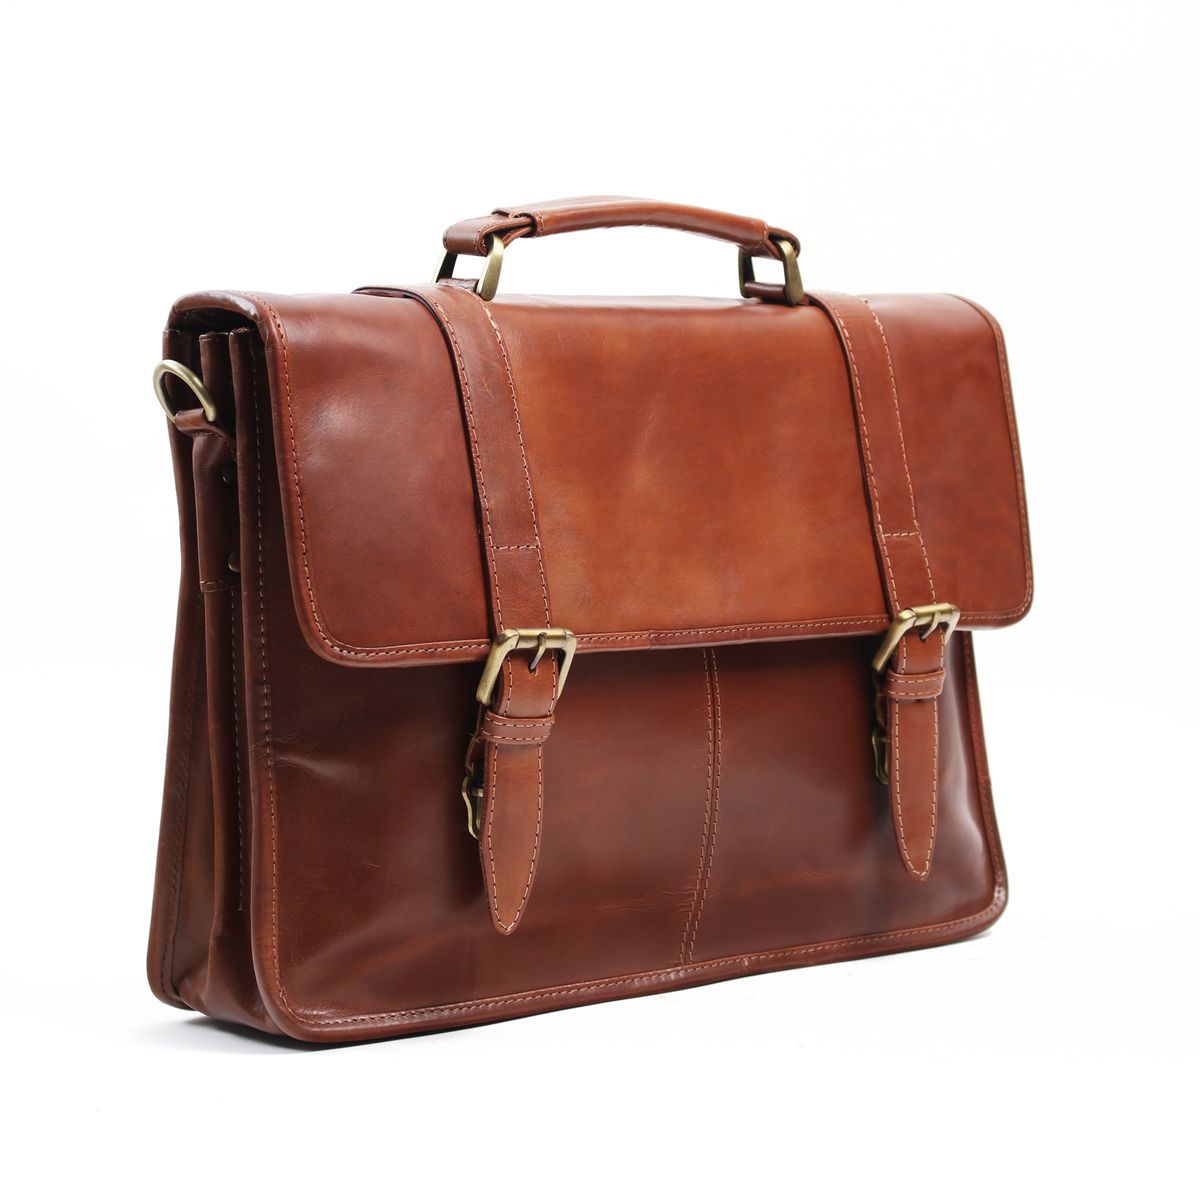 Nuvo - Dexter 15 Inch Leather Laptop Bag Cognac | Buy Online in South ...